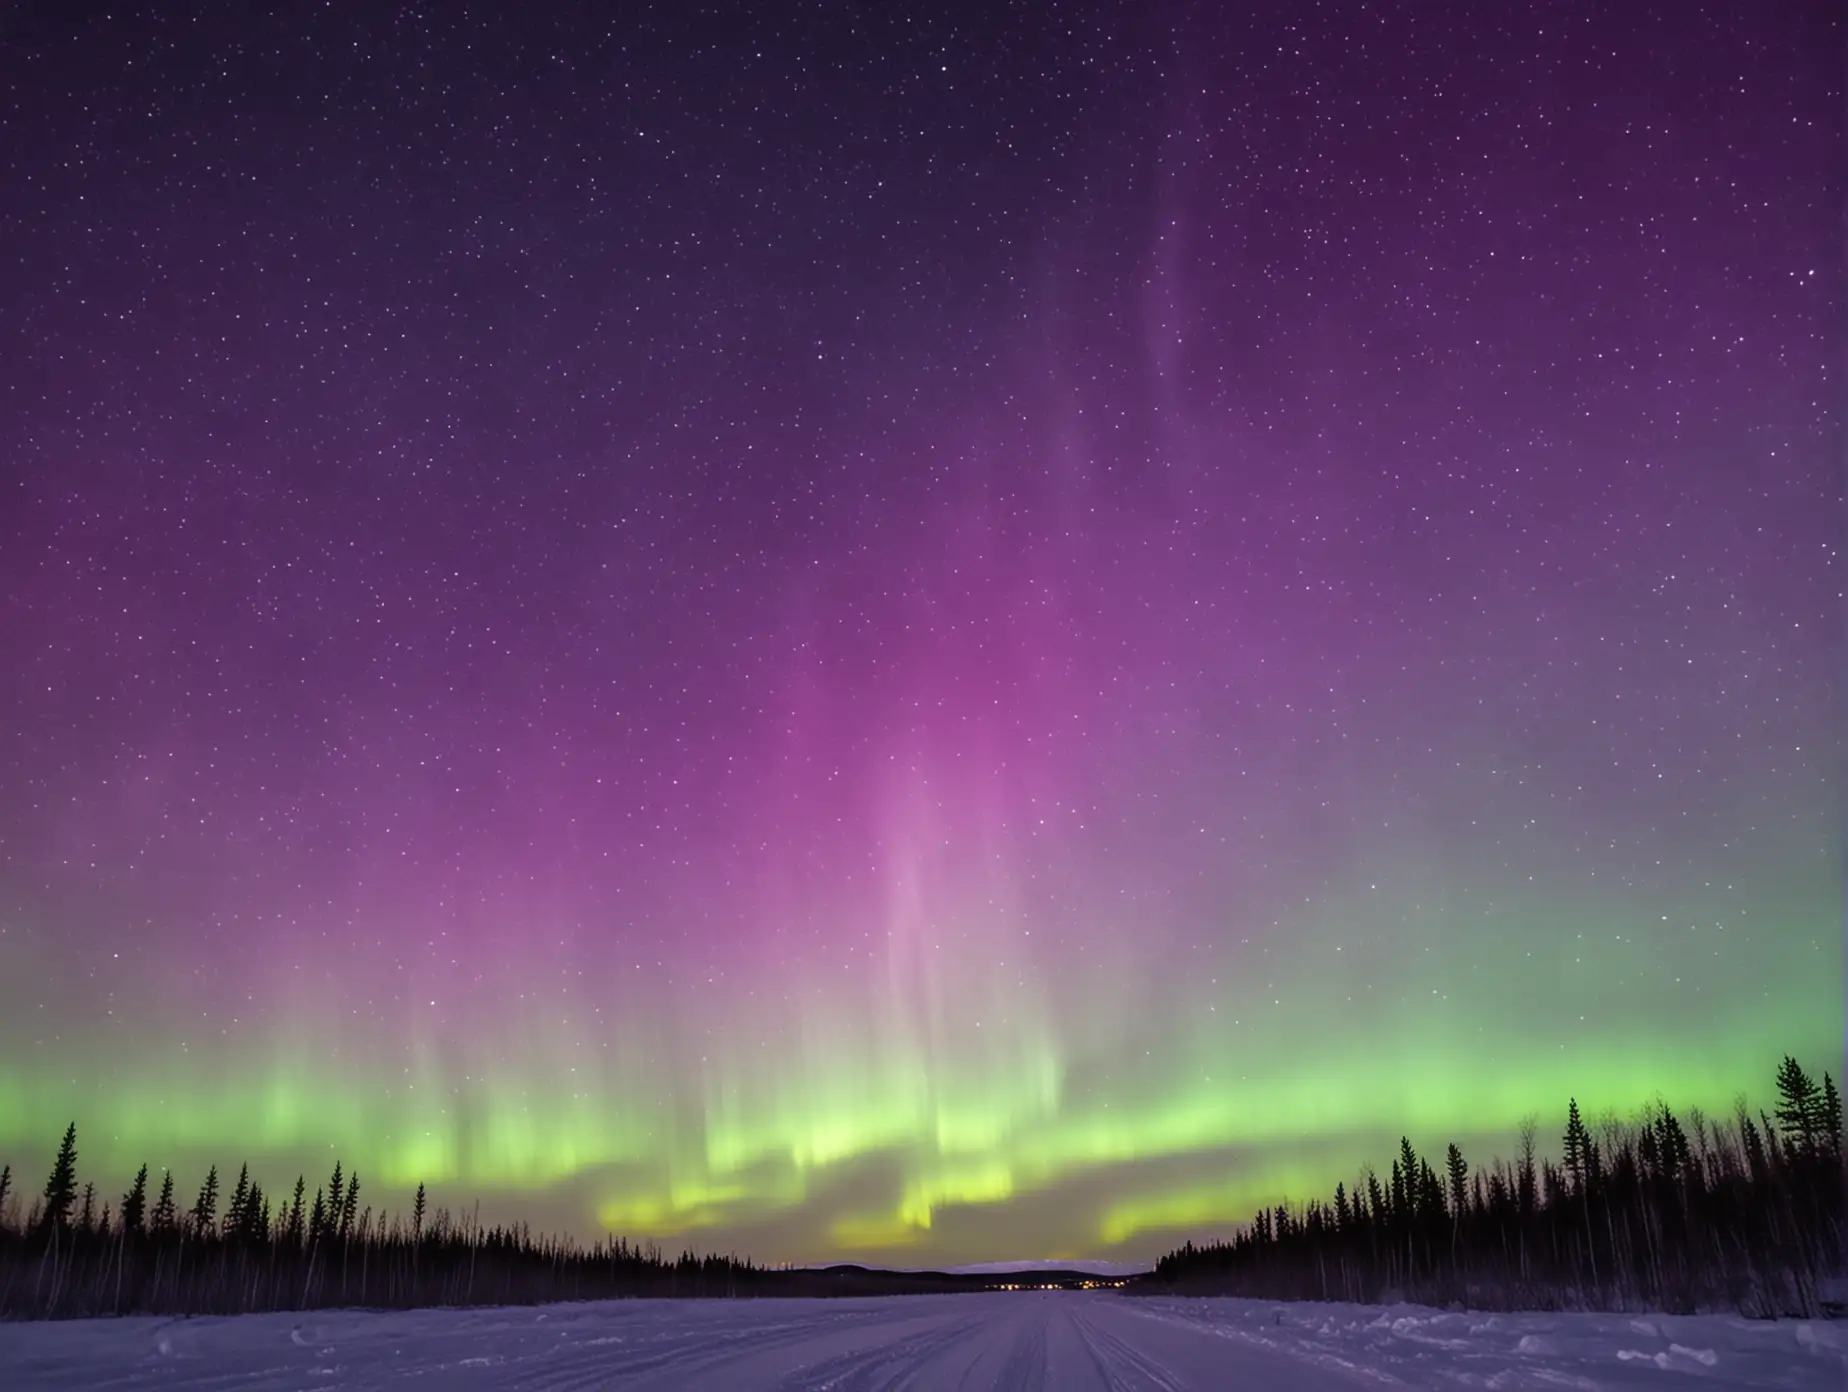 Northern Lights Overhead Pinkish Purple and Yellow Sky with No Ground View